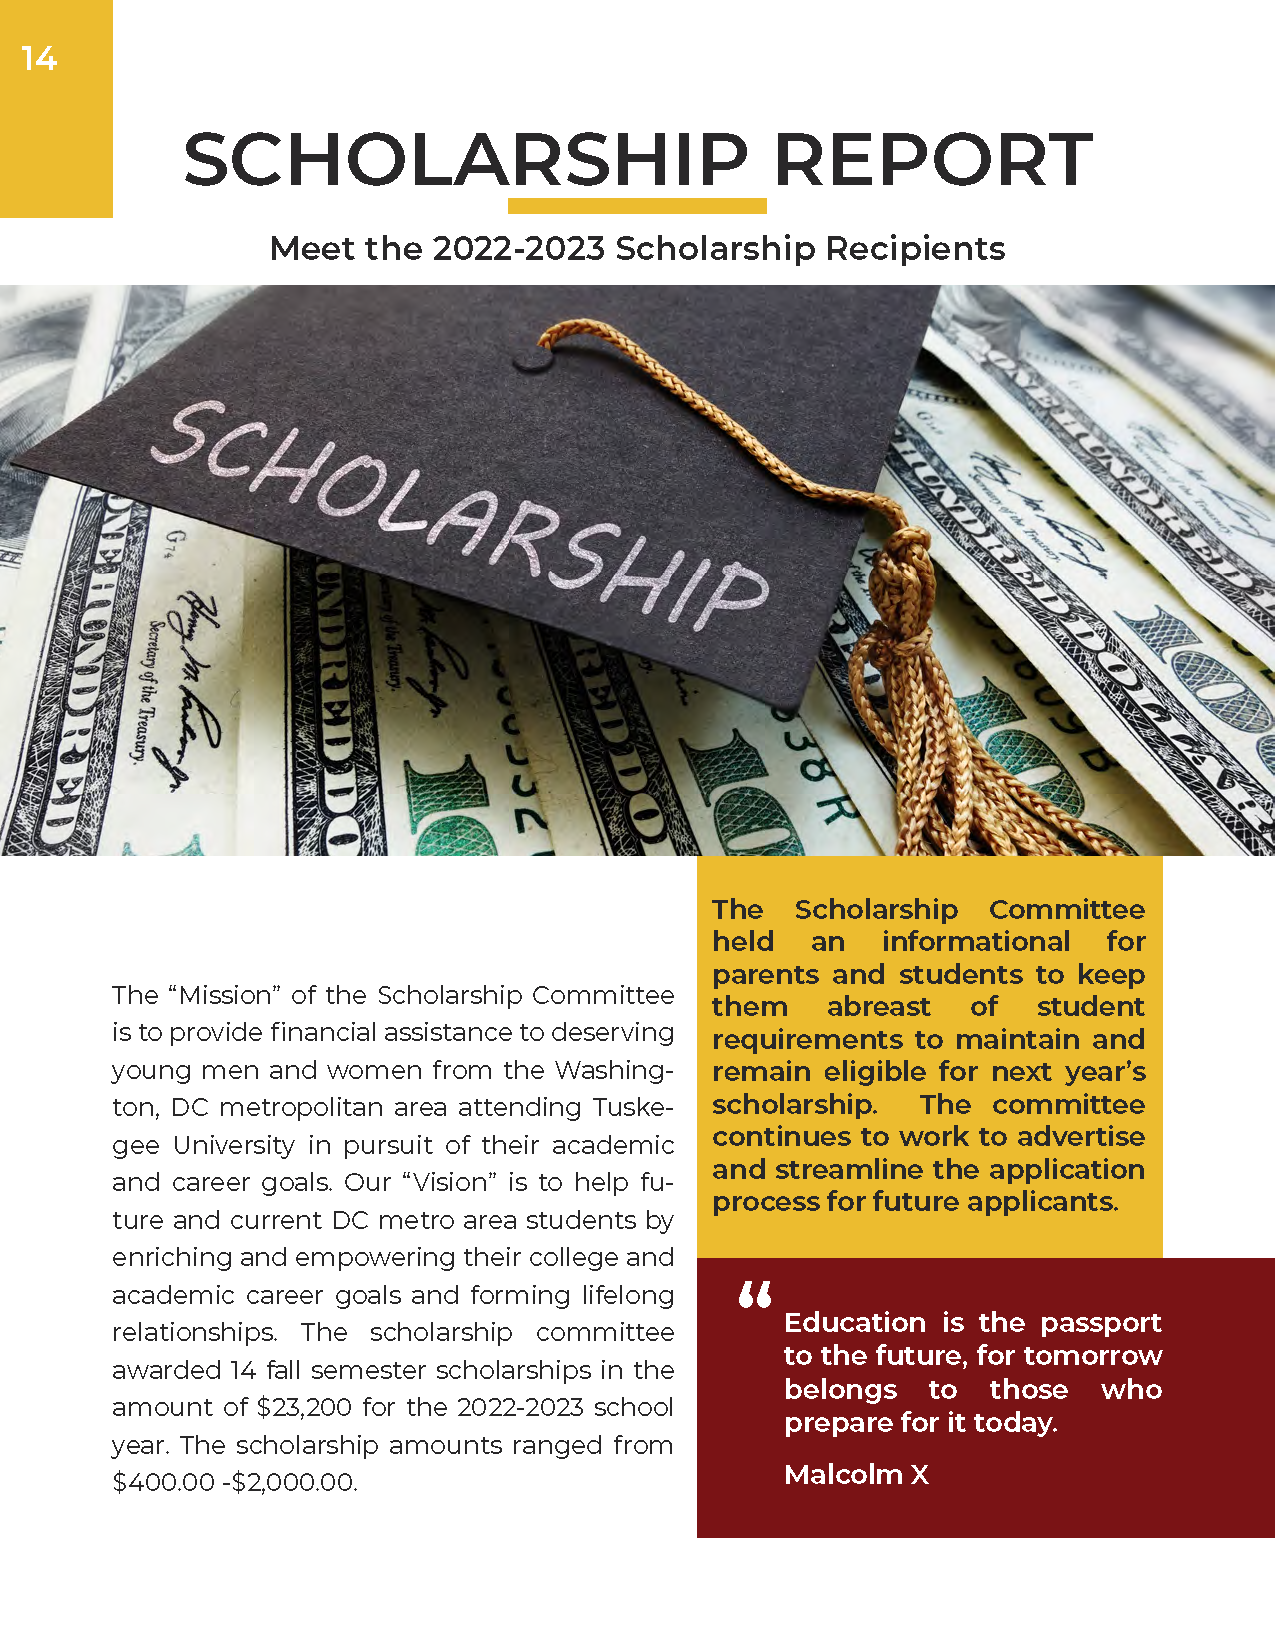 ScholarshipReport-2022-2023-sm_Page_1.png